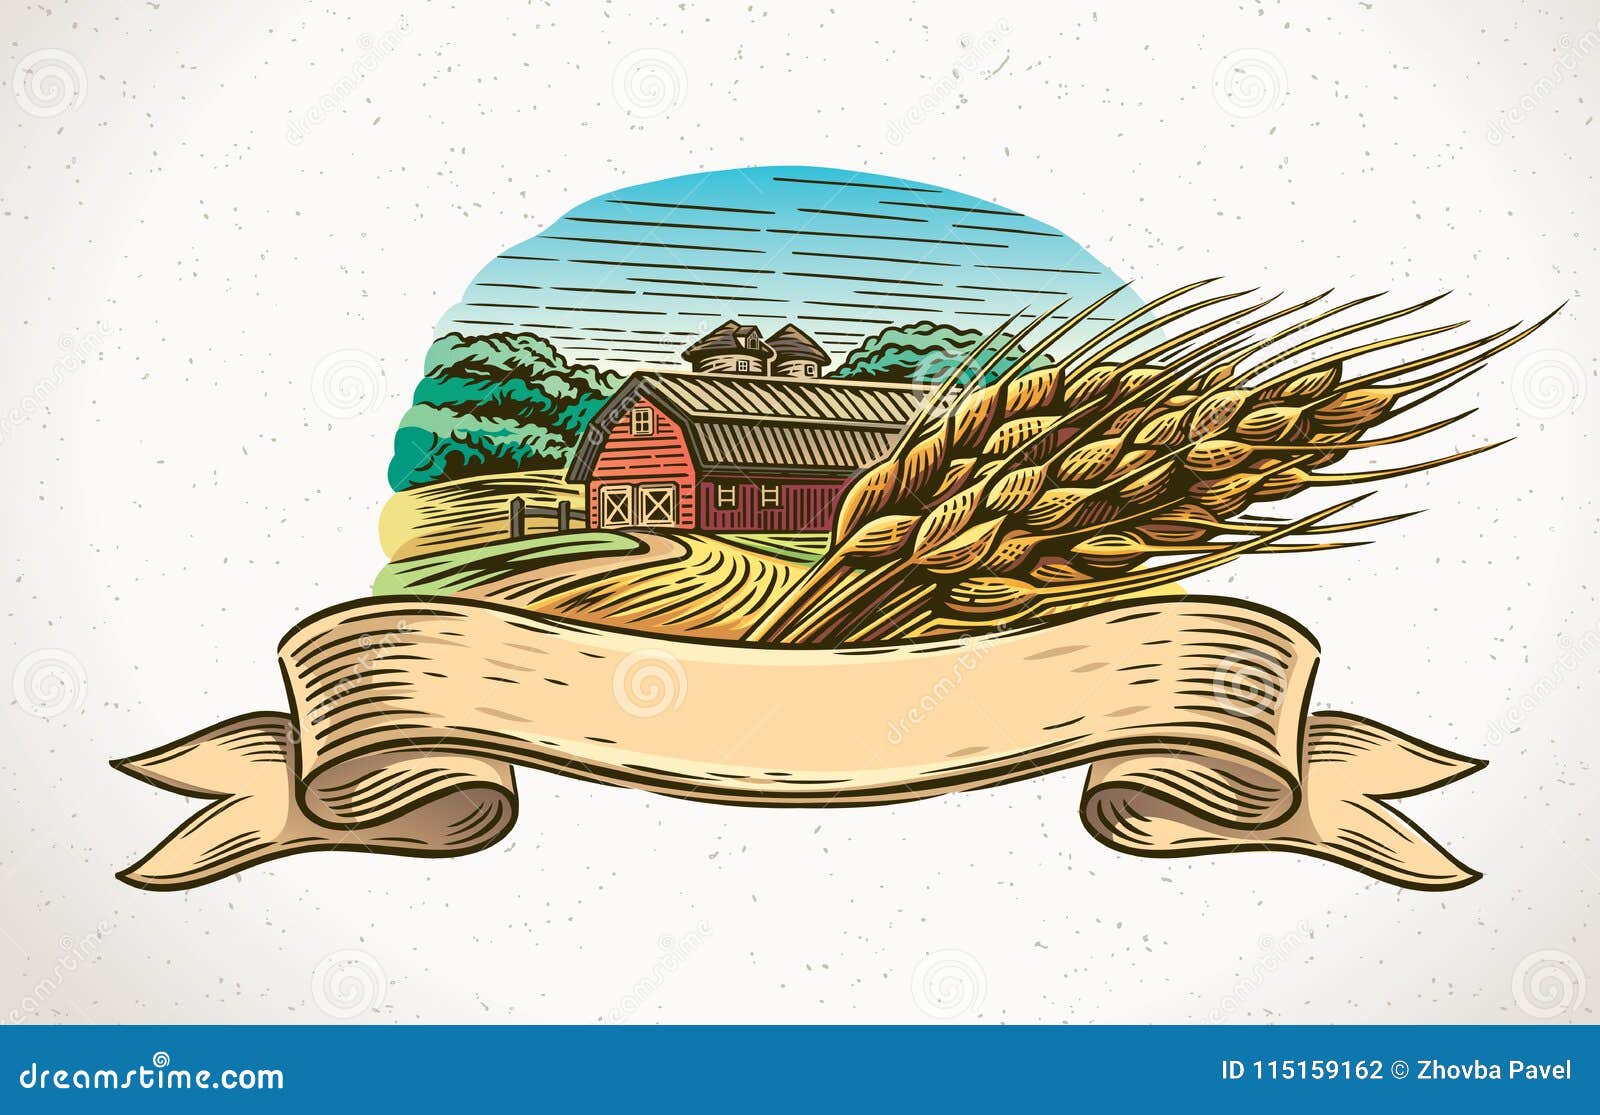 graphical landscape with a sheaf of wheat